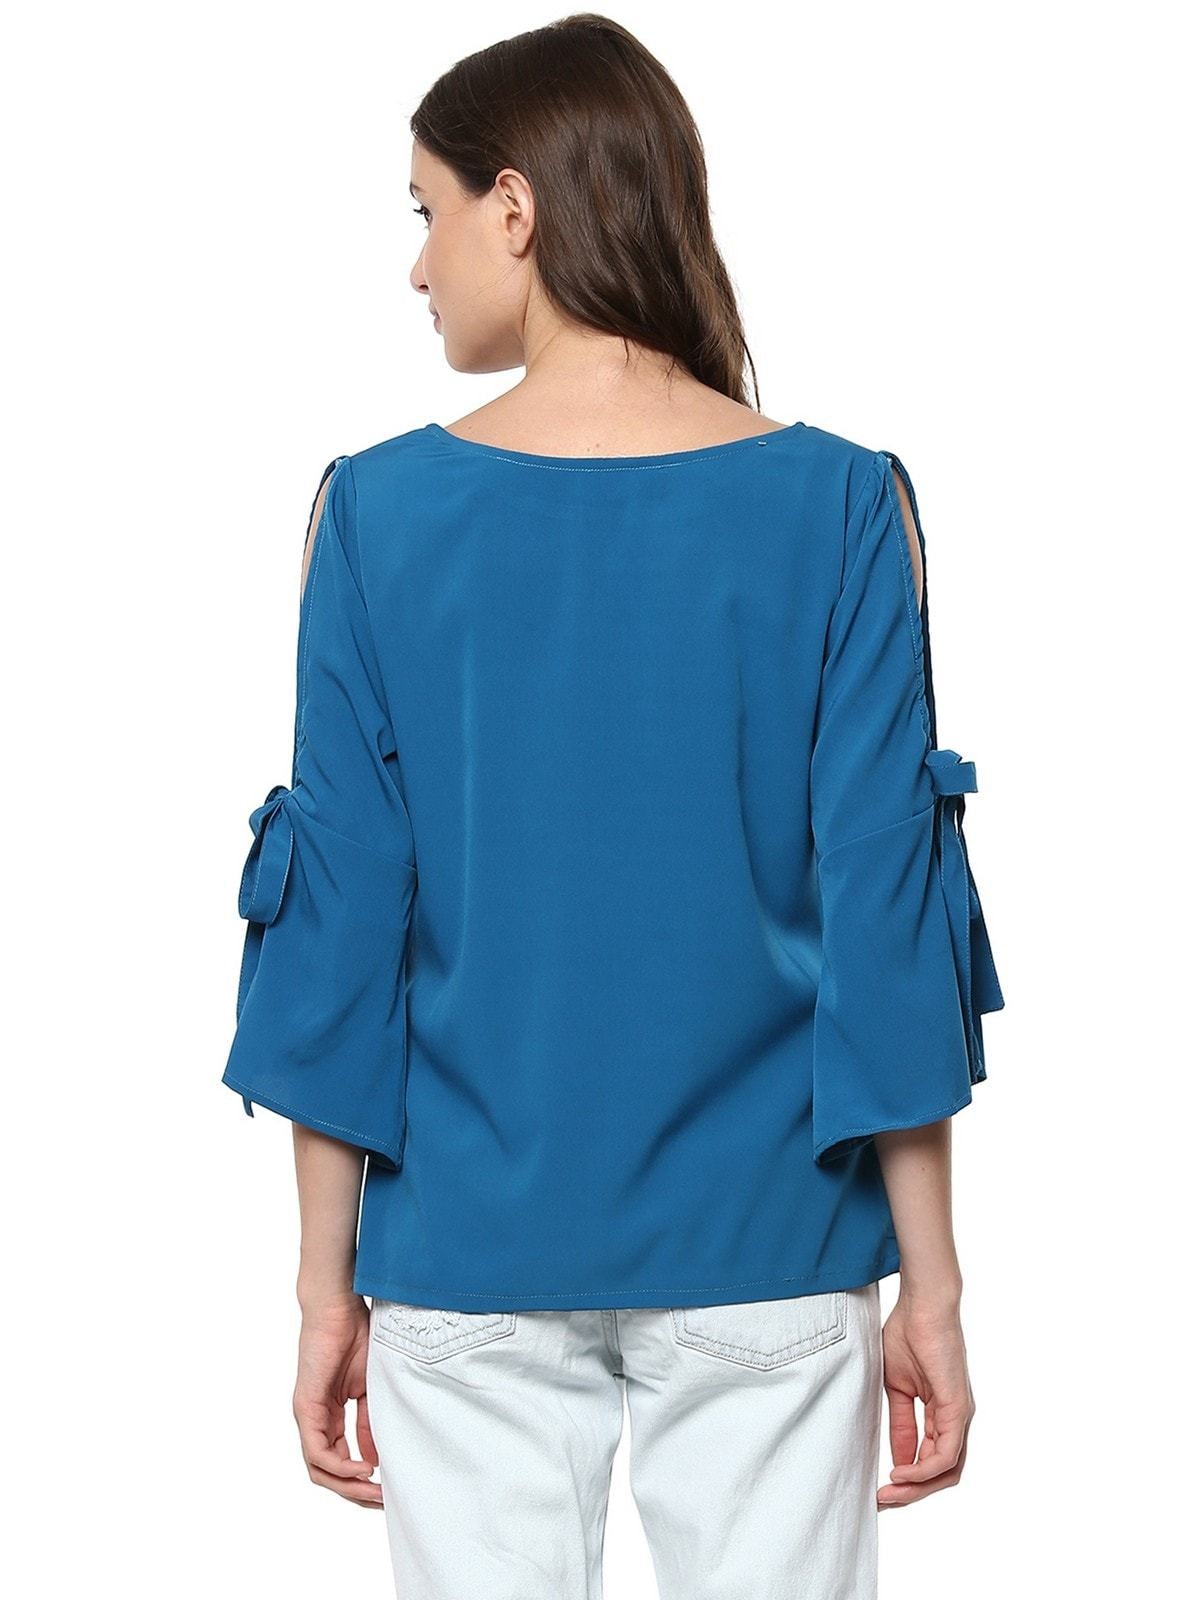 Women's Solid Top With Slit Tie-Up Bell Sleeves - Pannkh